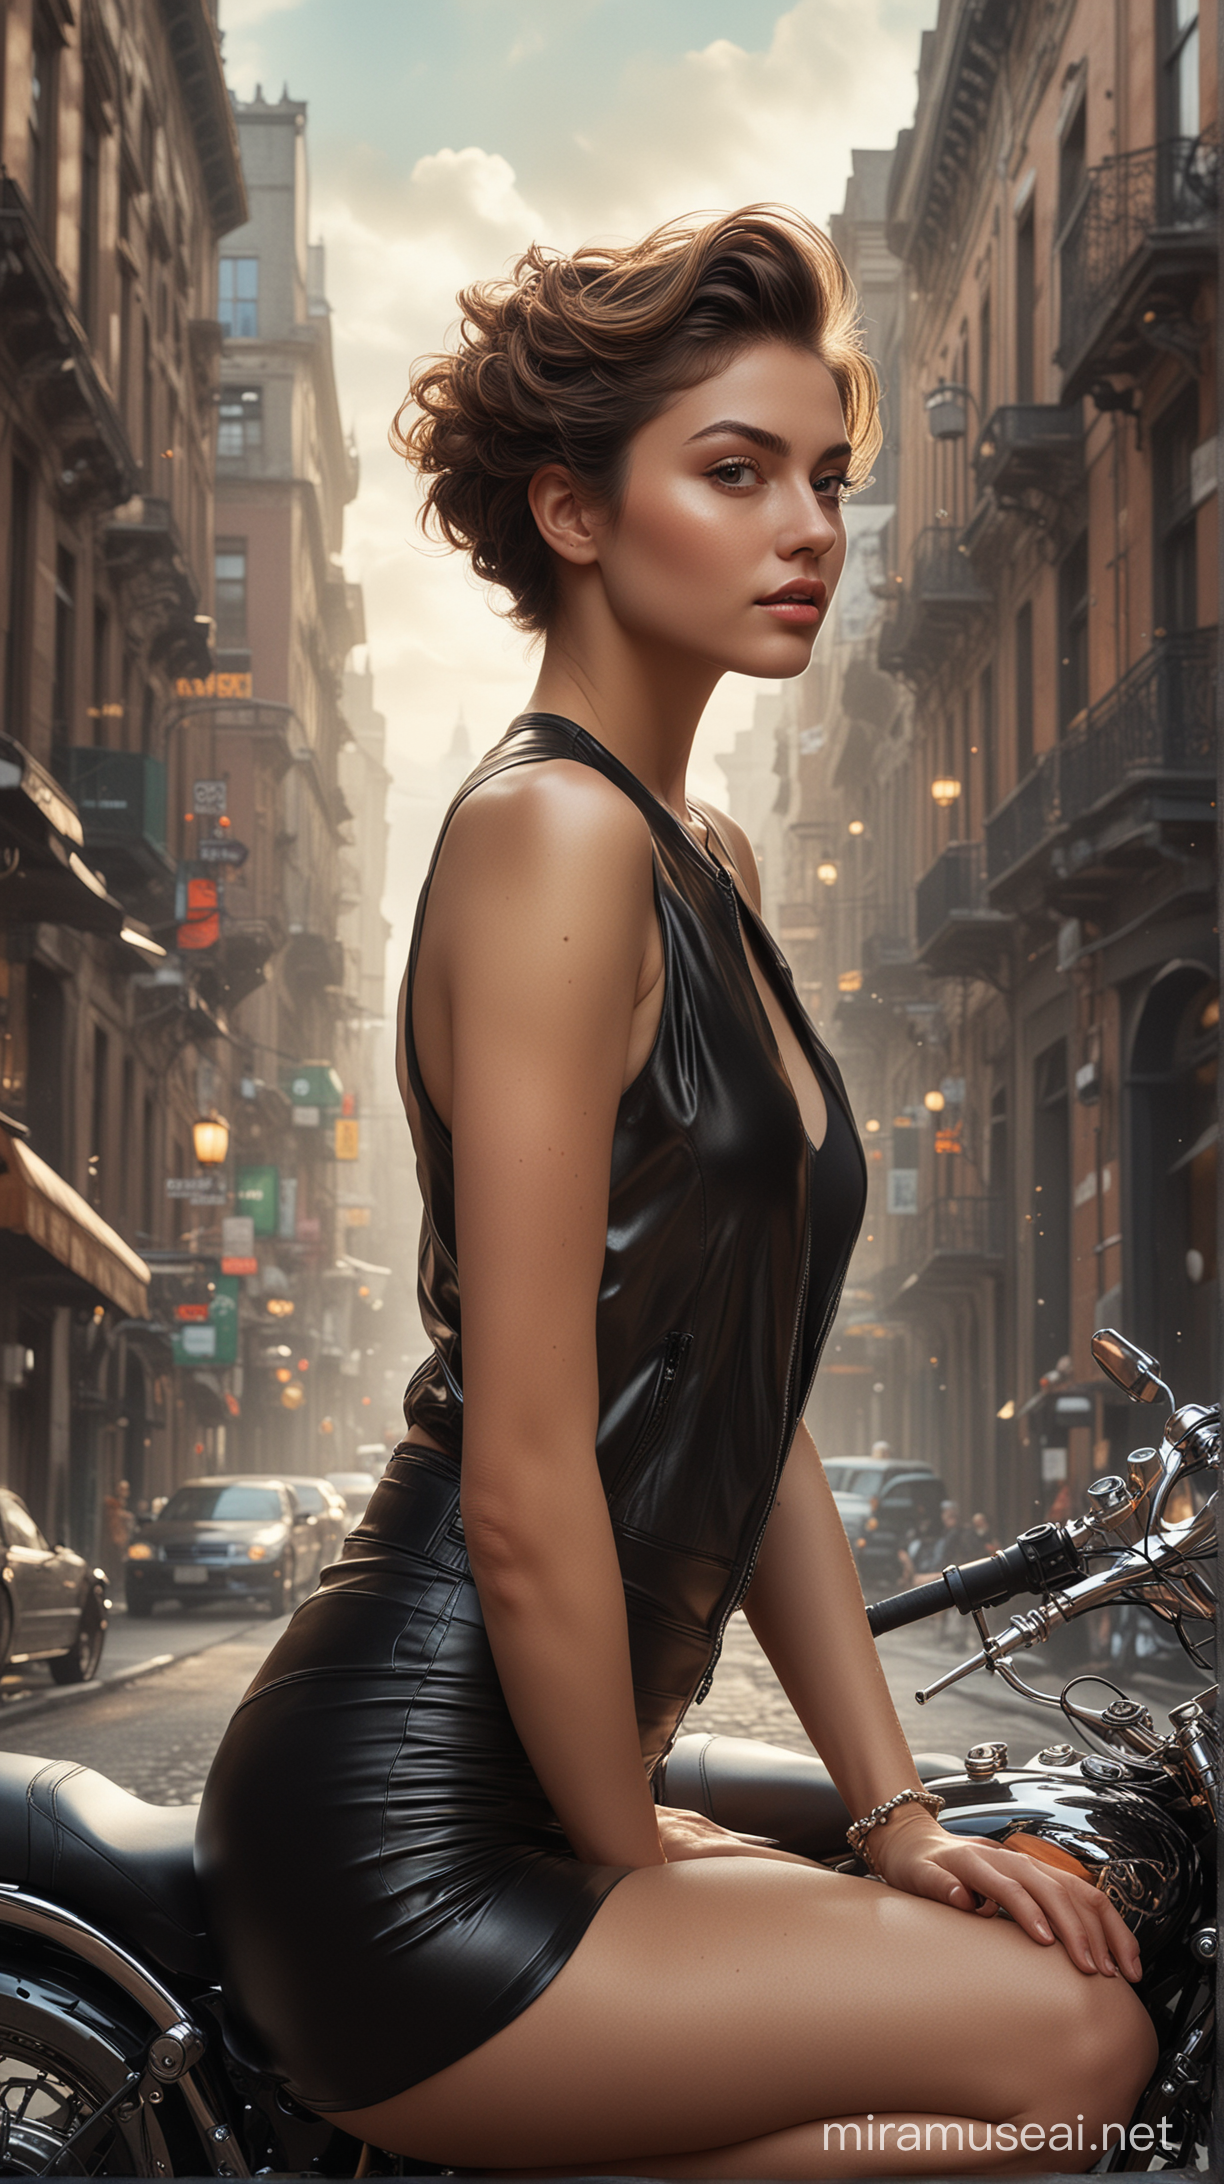 Captivating Urban Portrait Young Woman with Motorcycle in Surreal Opulence